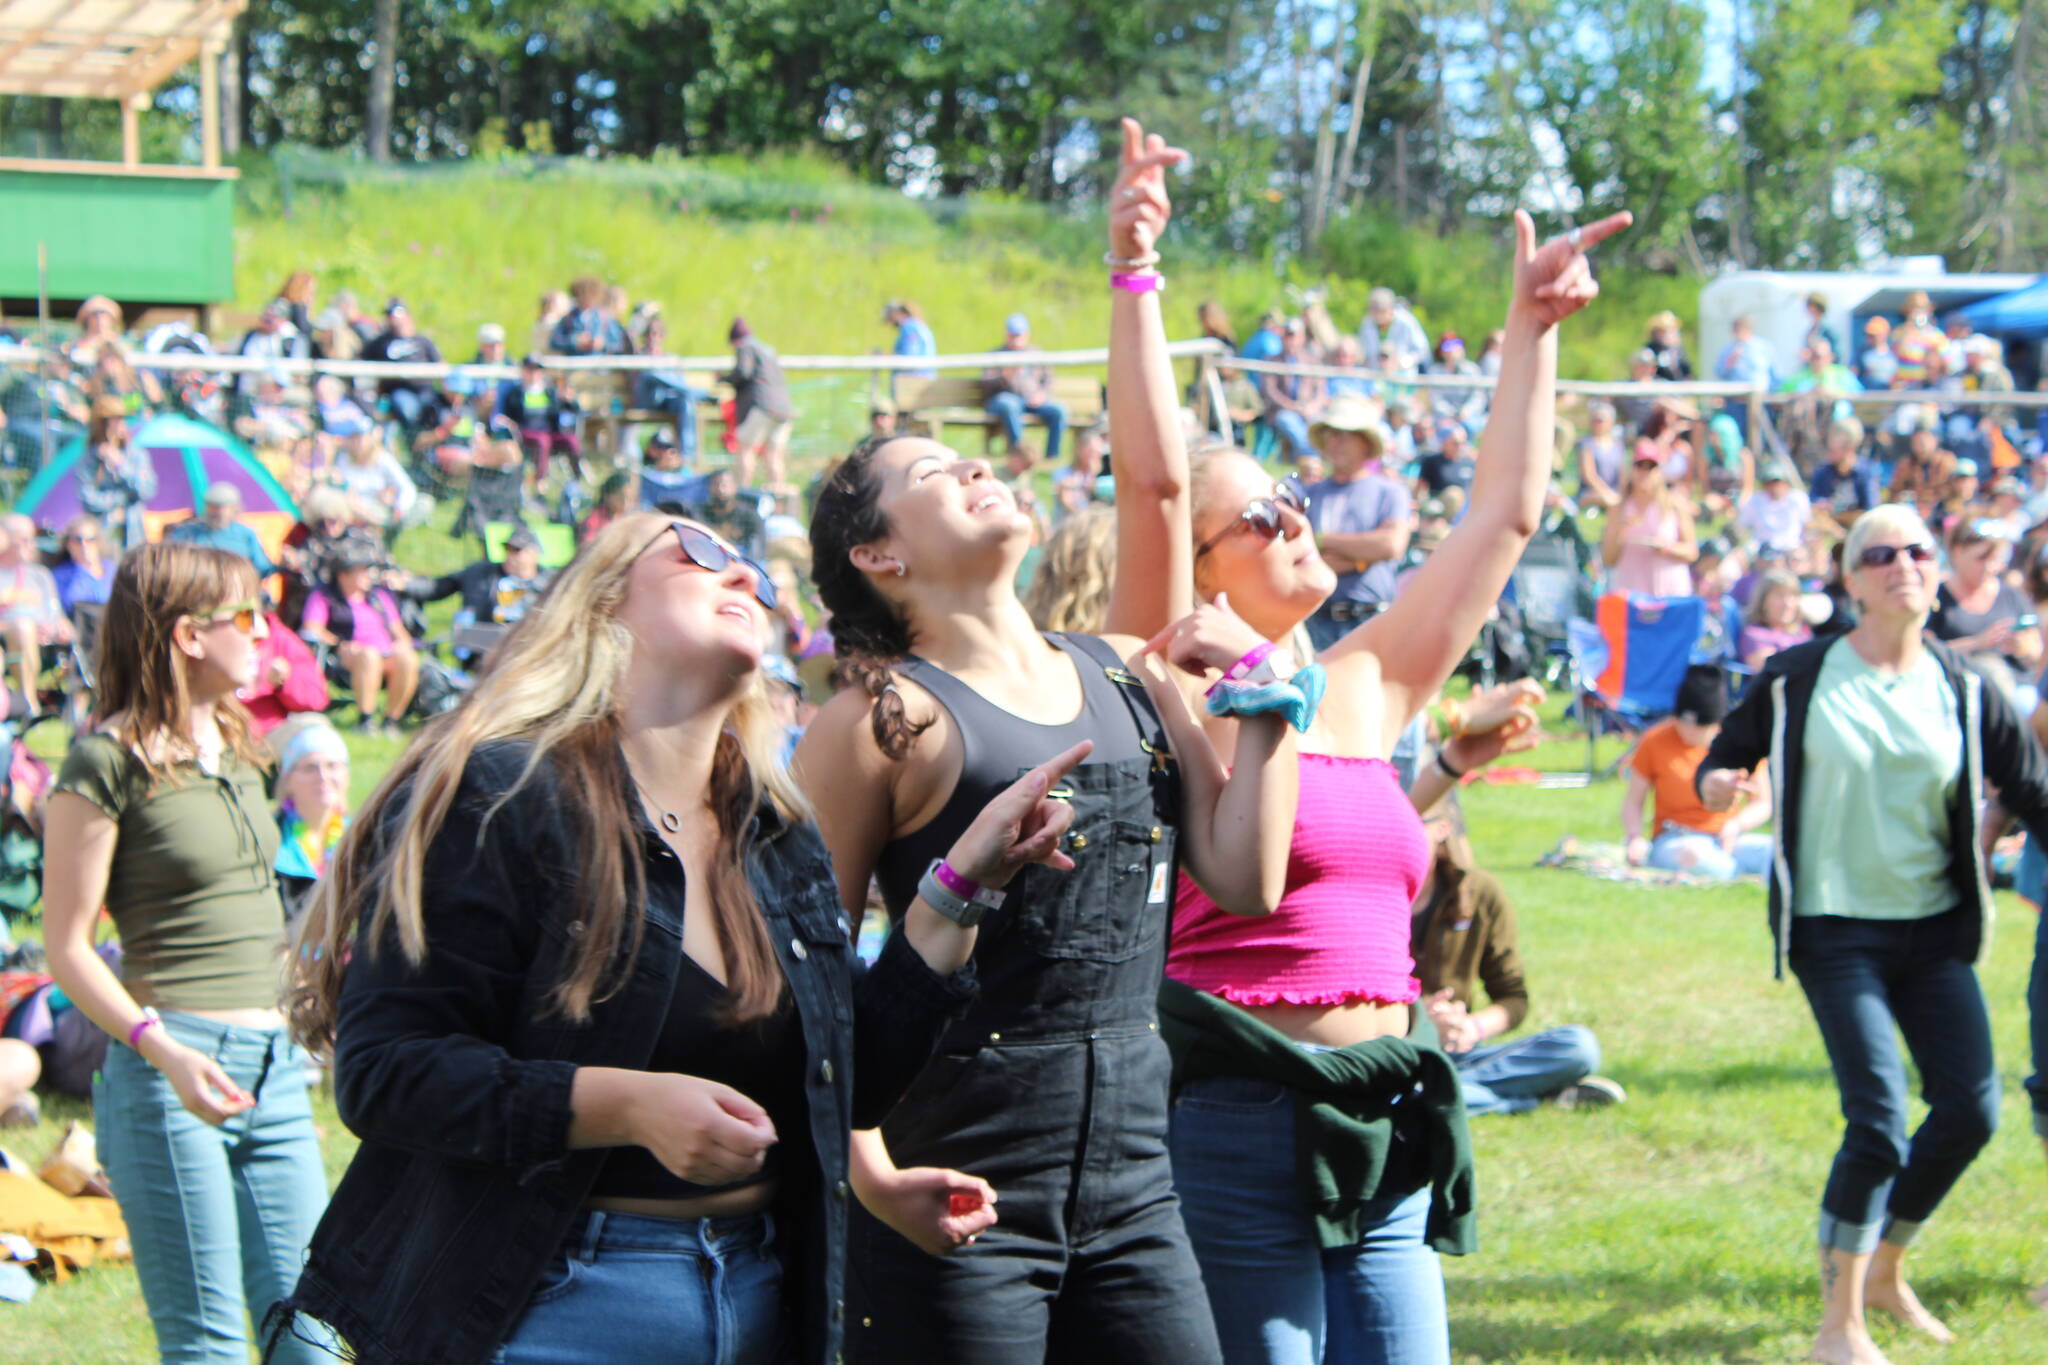 People gather in Ninilchik, Alaska, on Friday, Aug. 5, 2022, for Salmonfest, an annual event that raises awareness about salmon-related causes. (Camille Botello/Peninsula Clarion)